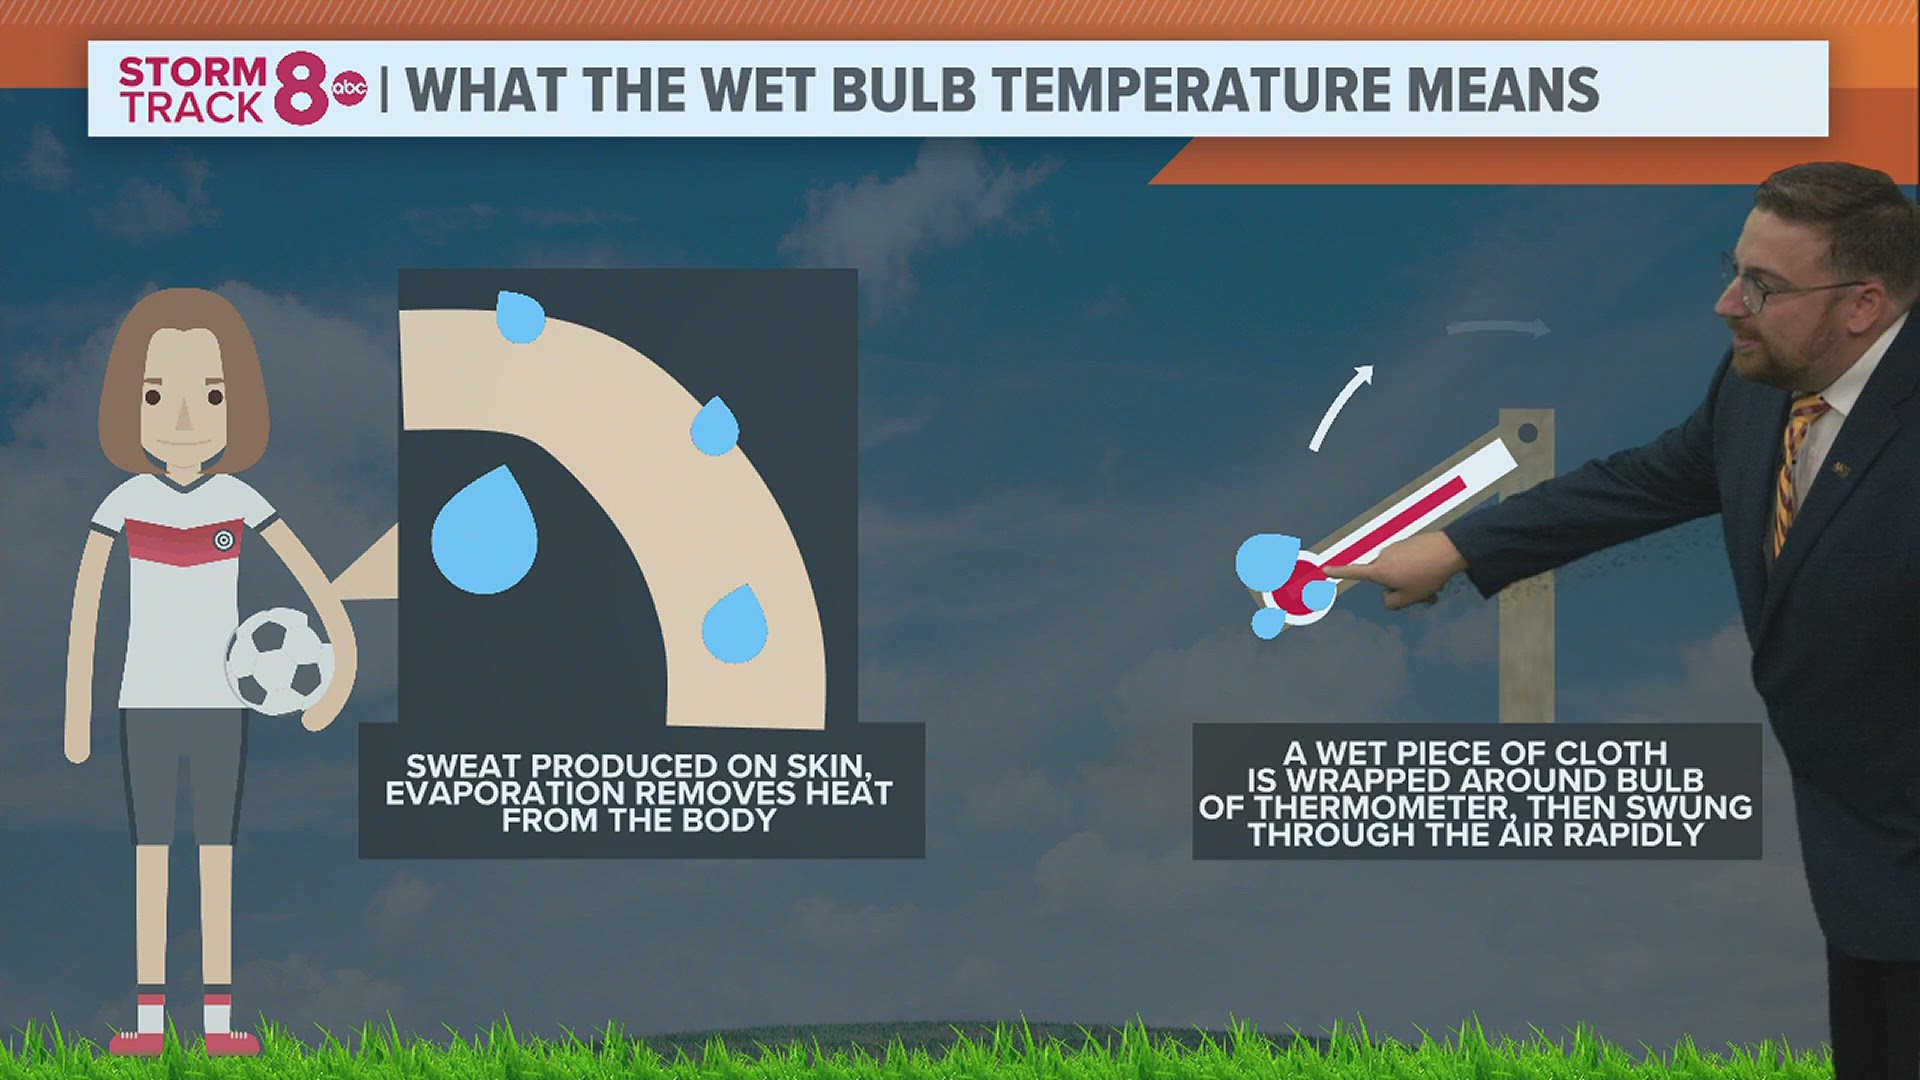 A lot of athletic departments use the wet bulb temperature when deciding whether or not to hold sporting events outside. Here's why.